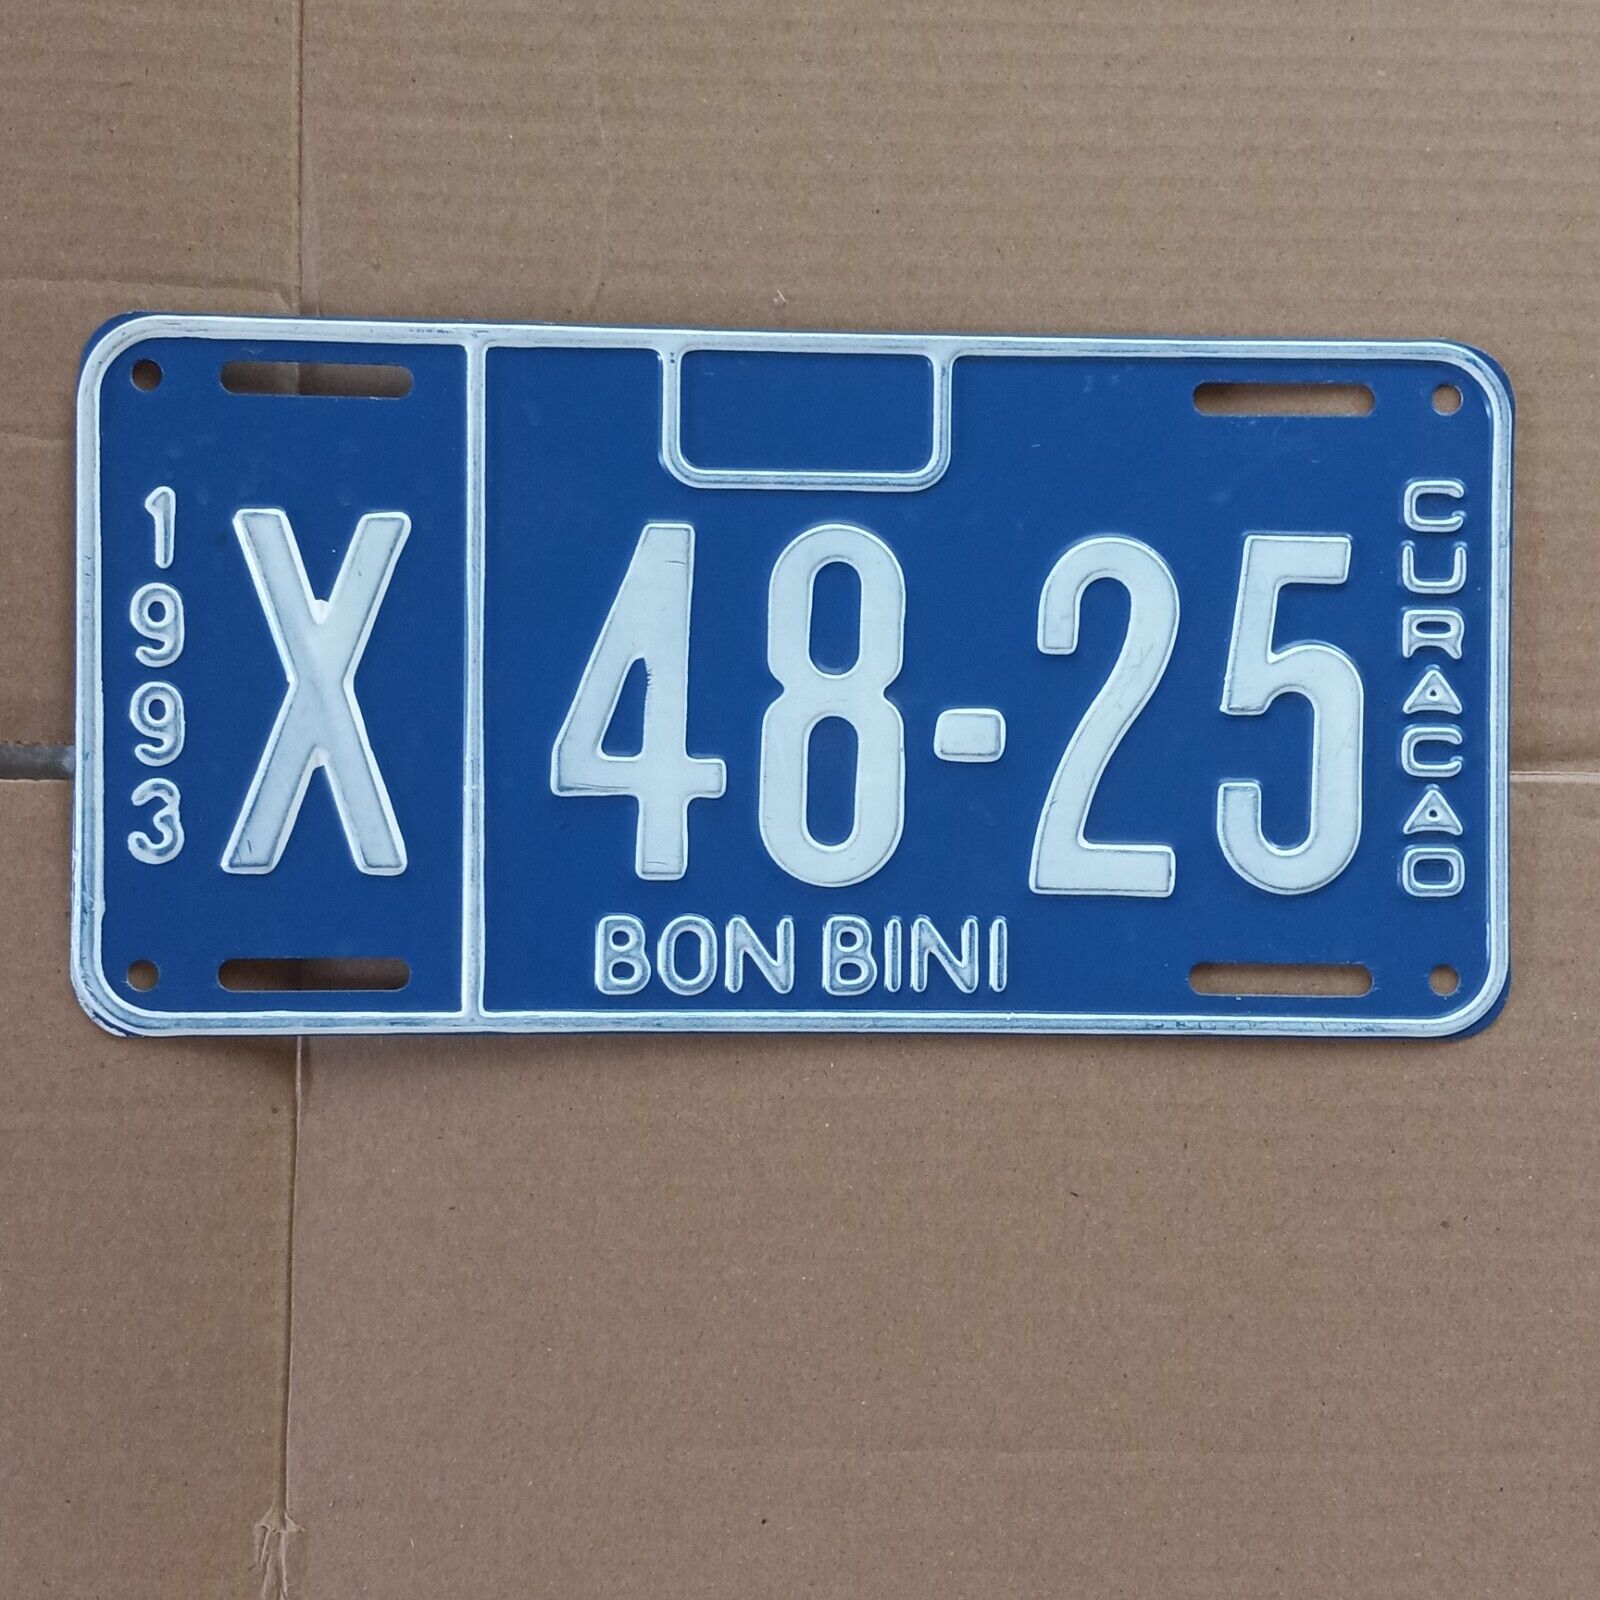 1993 Curacao License Plate - \